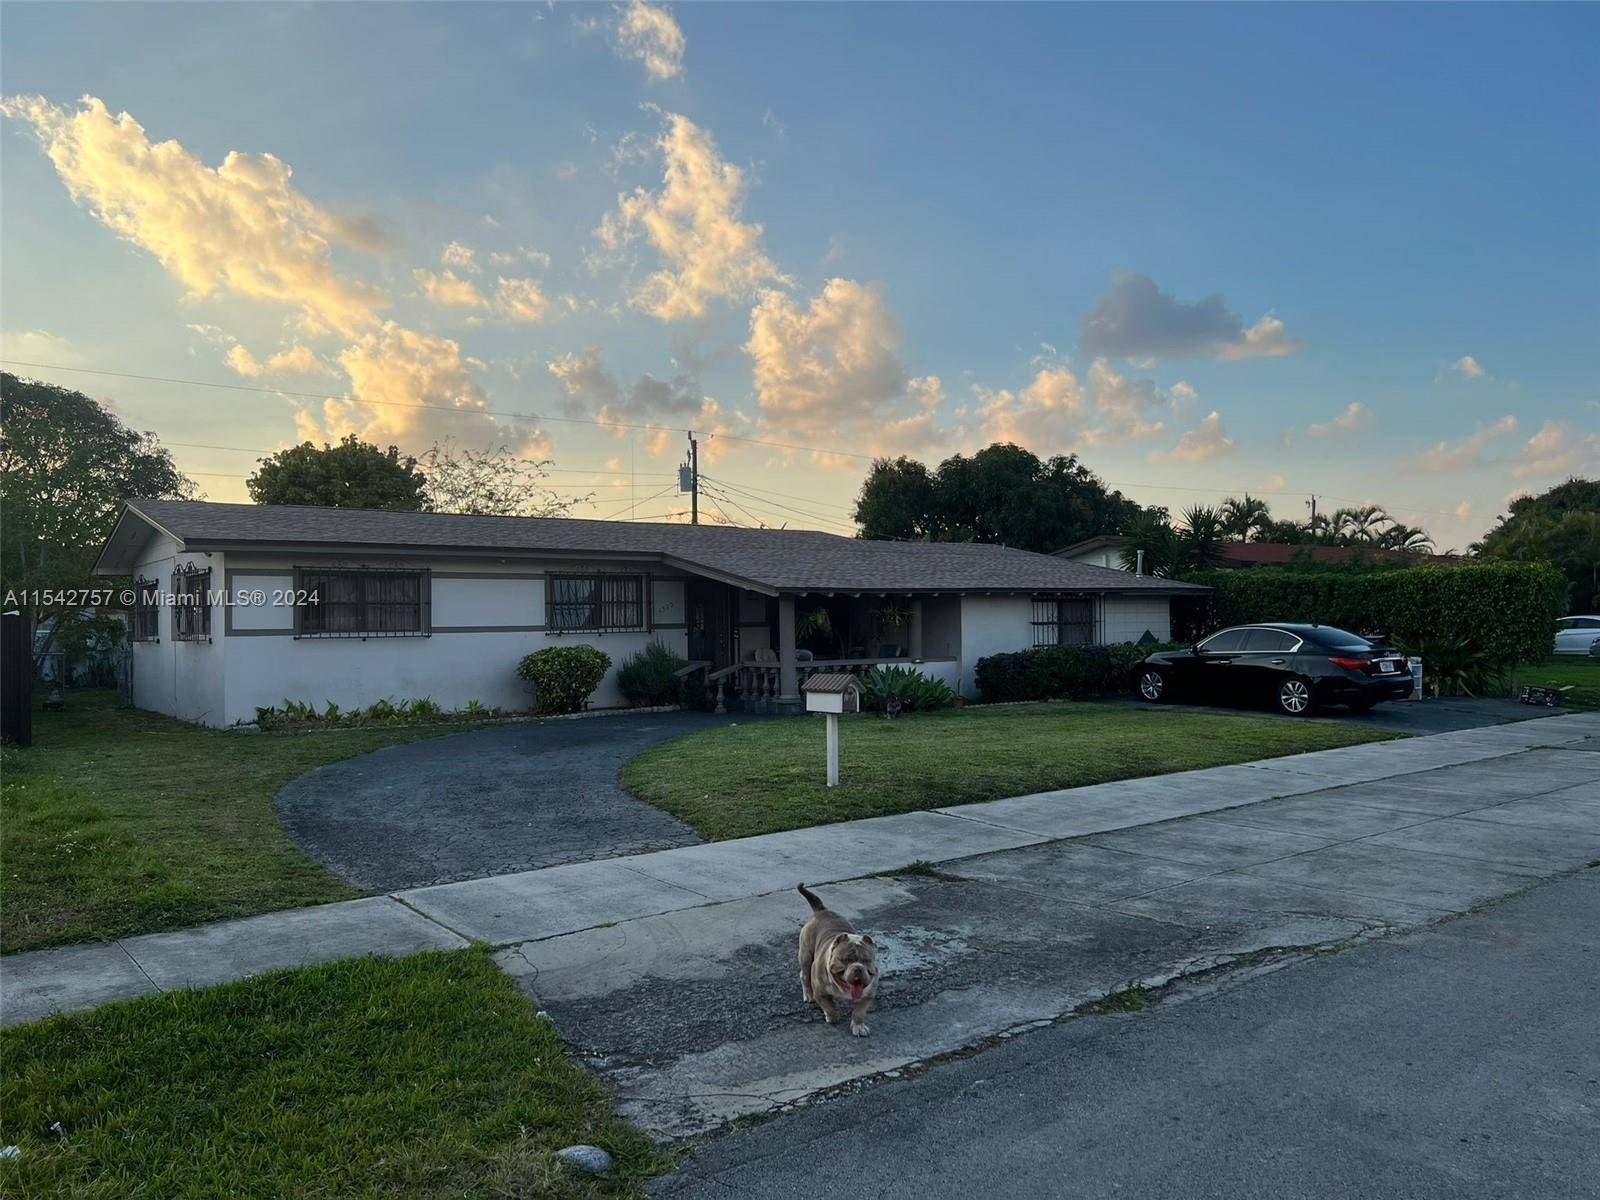 Charming single family home in West Hialeah, centrally located, New Roof, Big Backyard and much more.